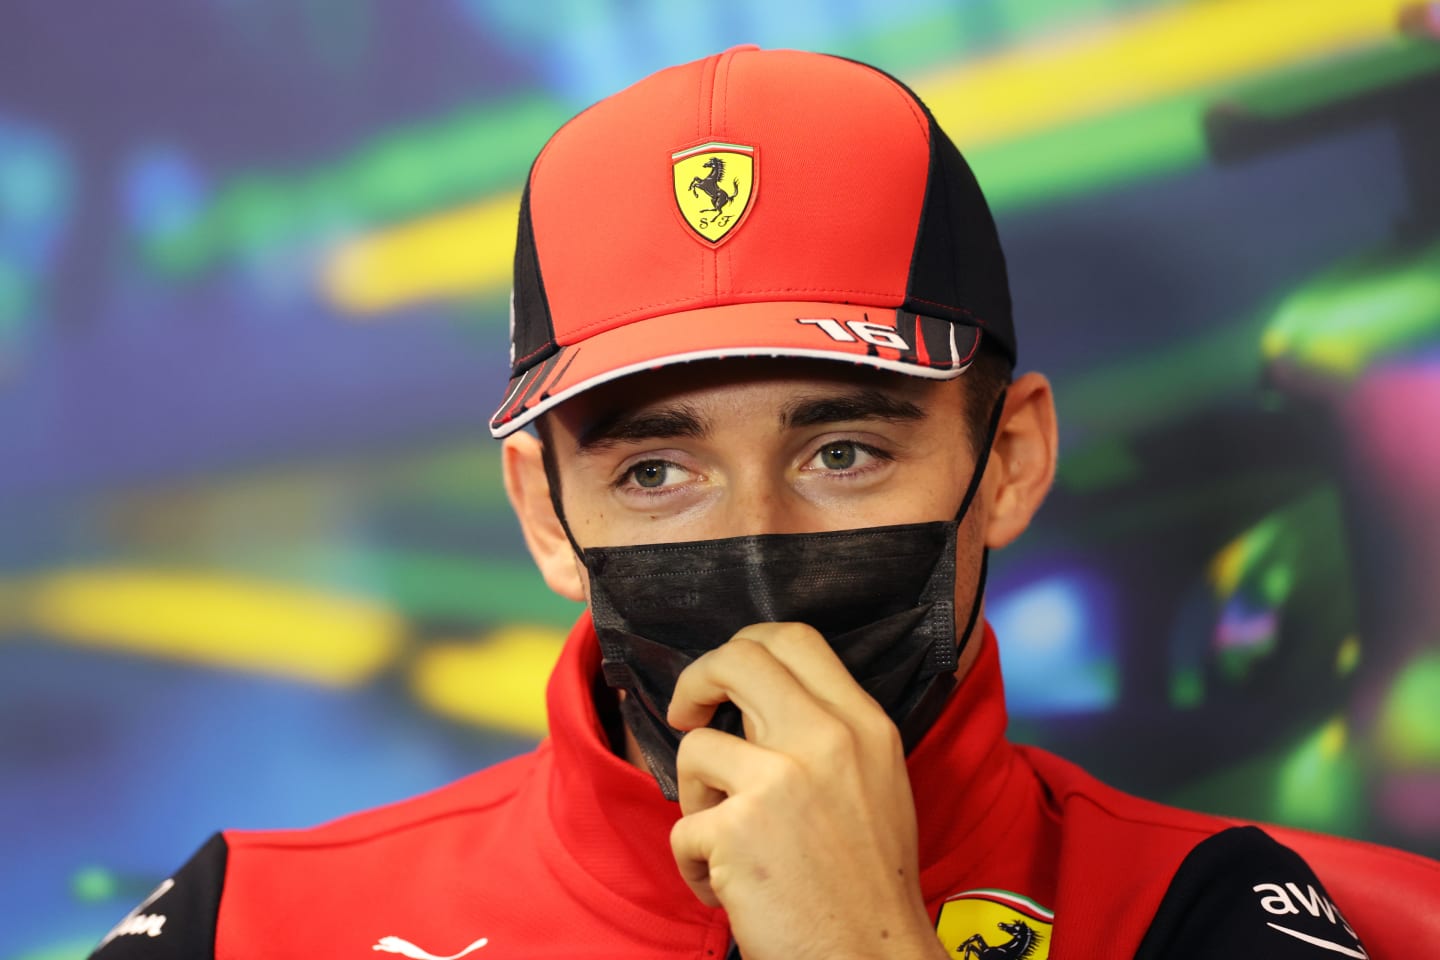 MELBOURNE, AUSTRALIA - APRIL 08: Charles Leclerc of Monaco and Ferrari looks on in the Drivers Press Conference prior to practice ahead of the F1 Grand Prix of Australia at Melbourne Grand Prix Circuit on April 08, 2022 in Melbourne, Australia. (Photo by Robert Cianflone/Getty Images)